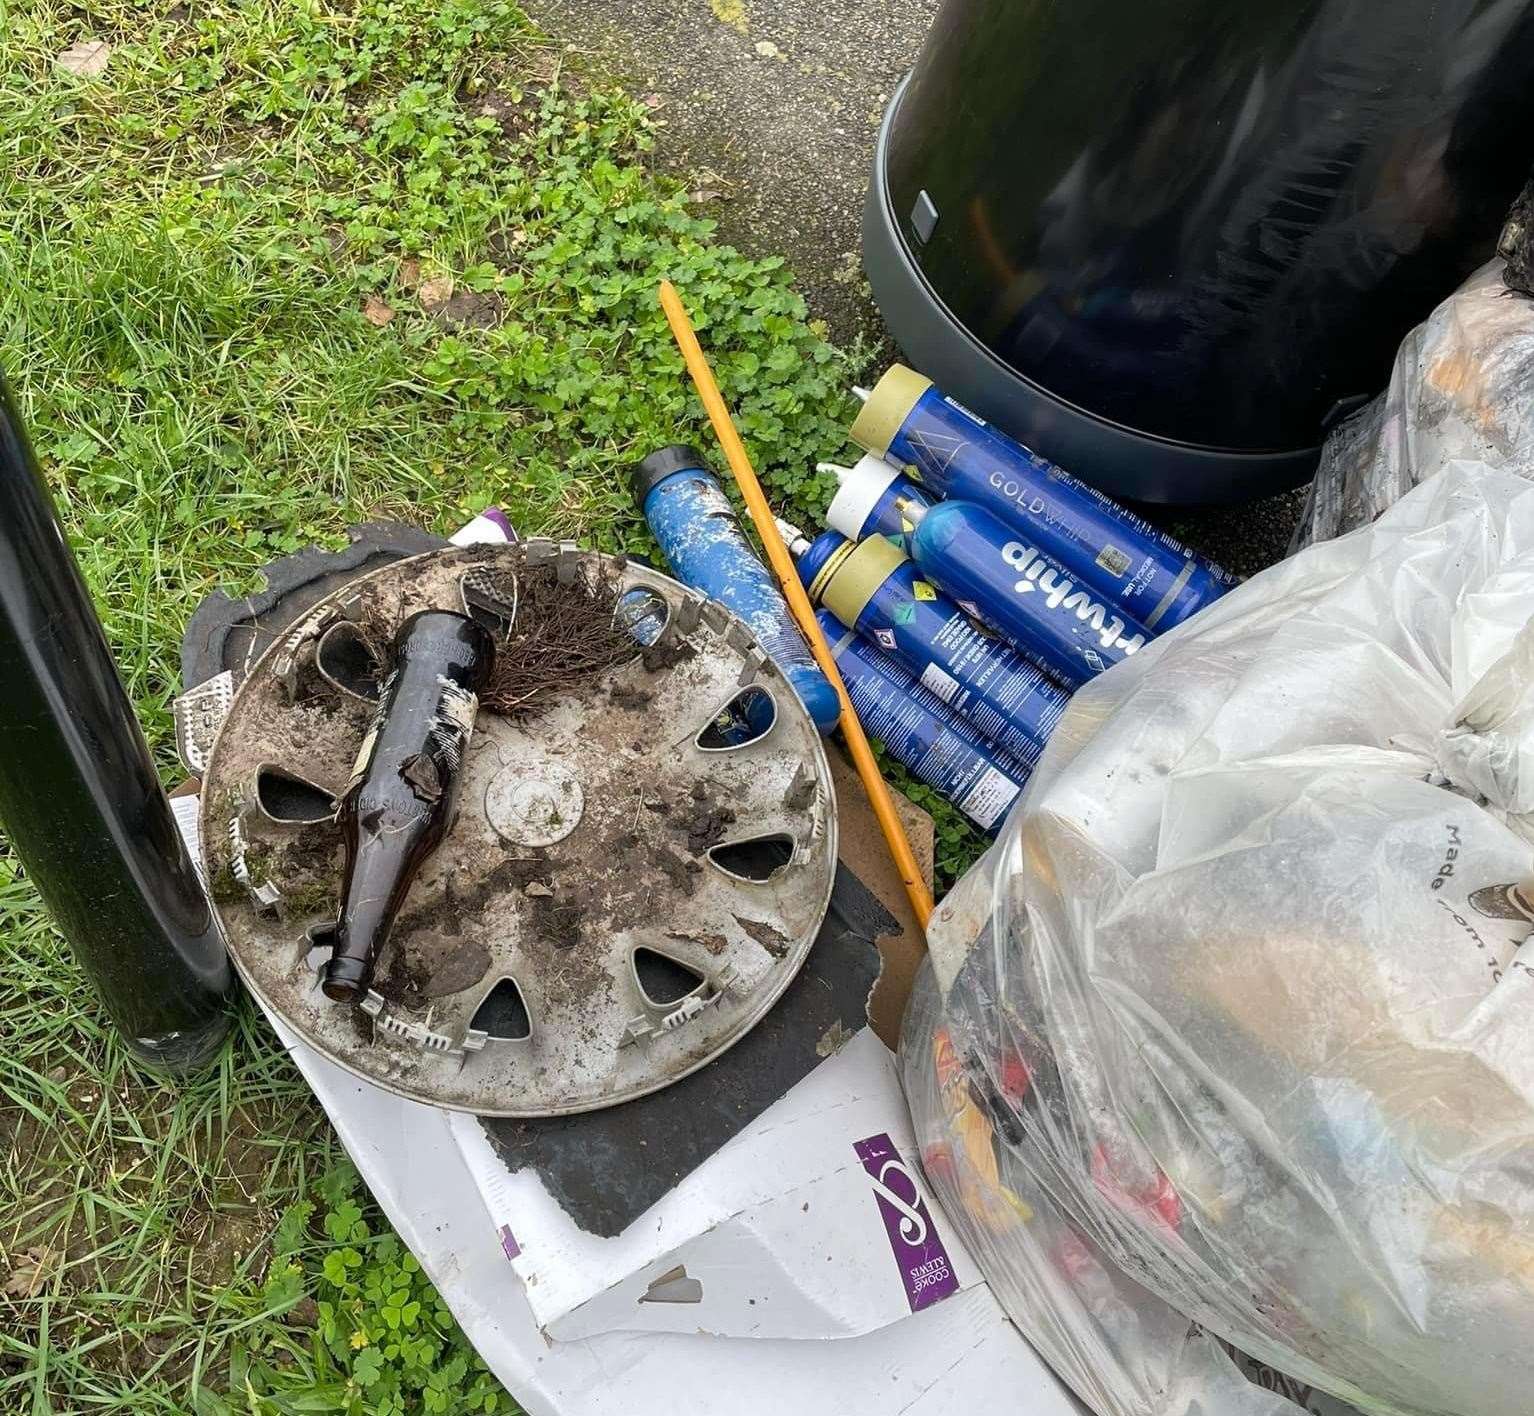 Litter-pickers are calling for their ban after continually to see them discarded around Greenhithe